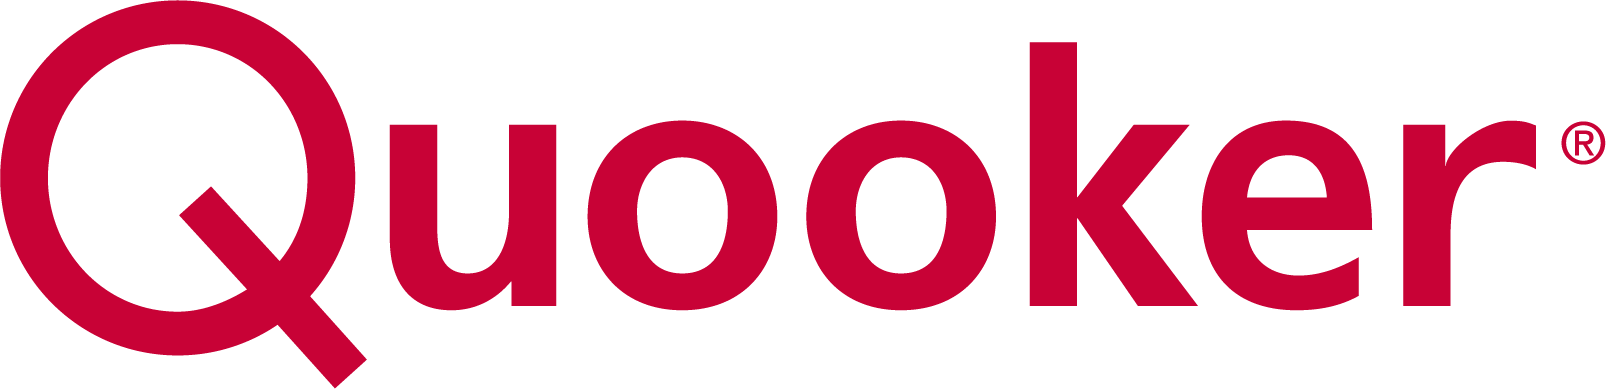 Quooker logo in red